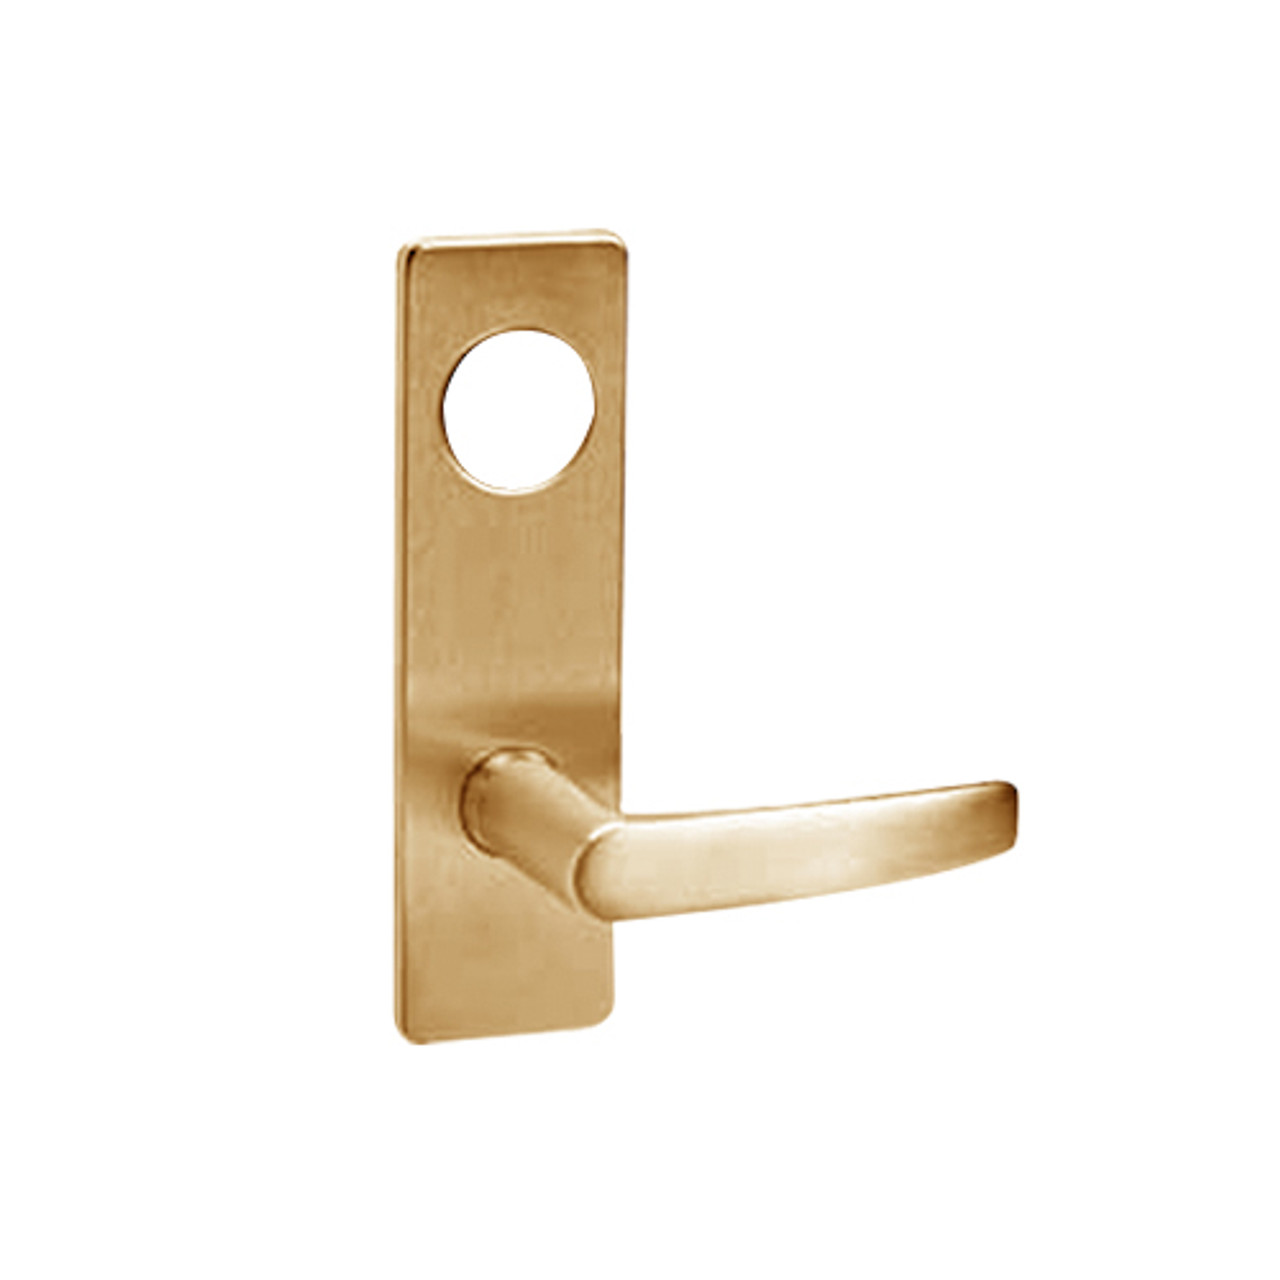 ML2055-ASM-612-M31 Corbin Russwin ML2000 Series Mortise Classroom Trim Pack with Armstrong Lever in Satin Bronze